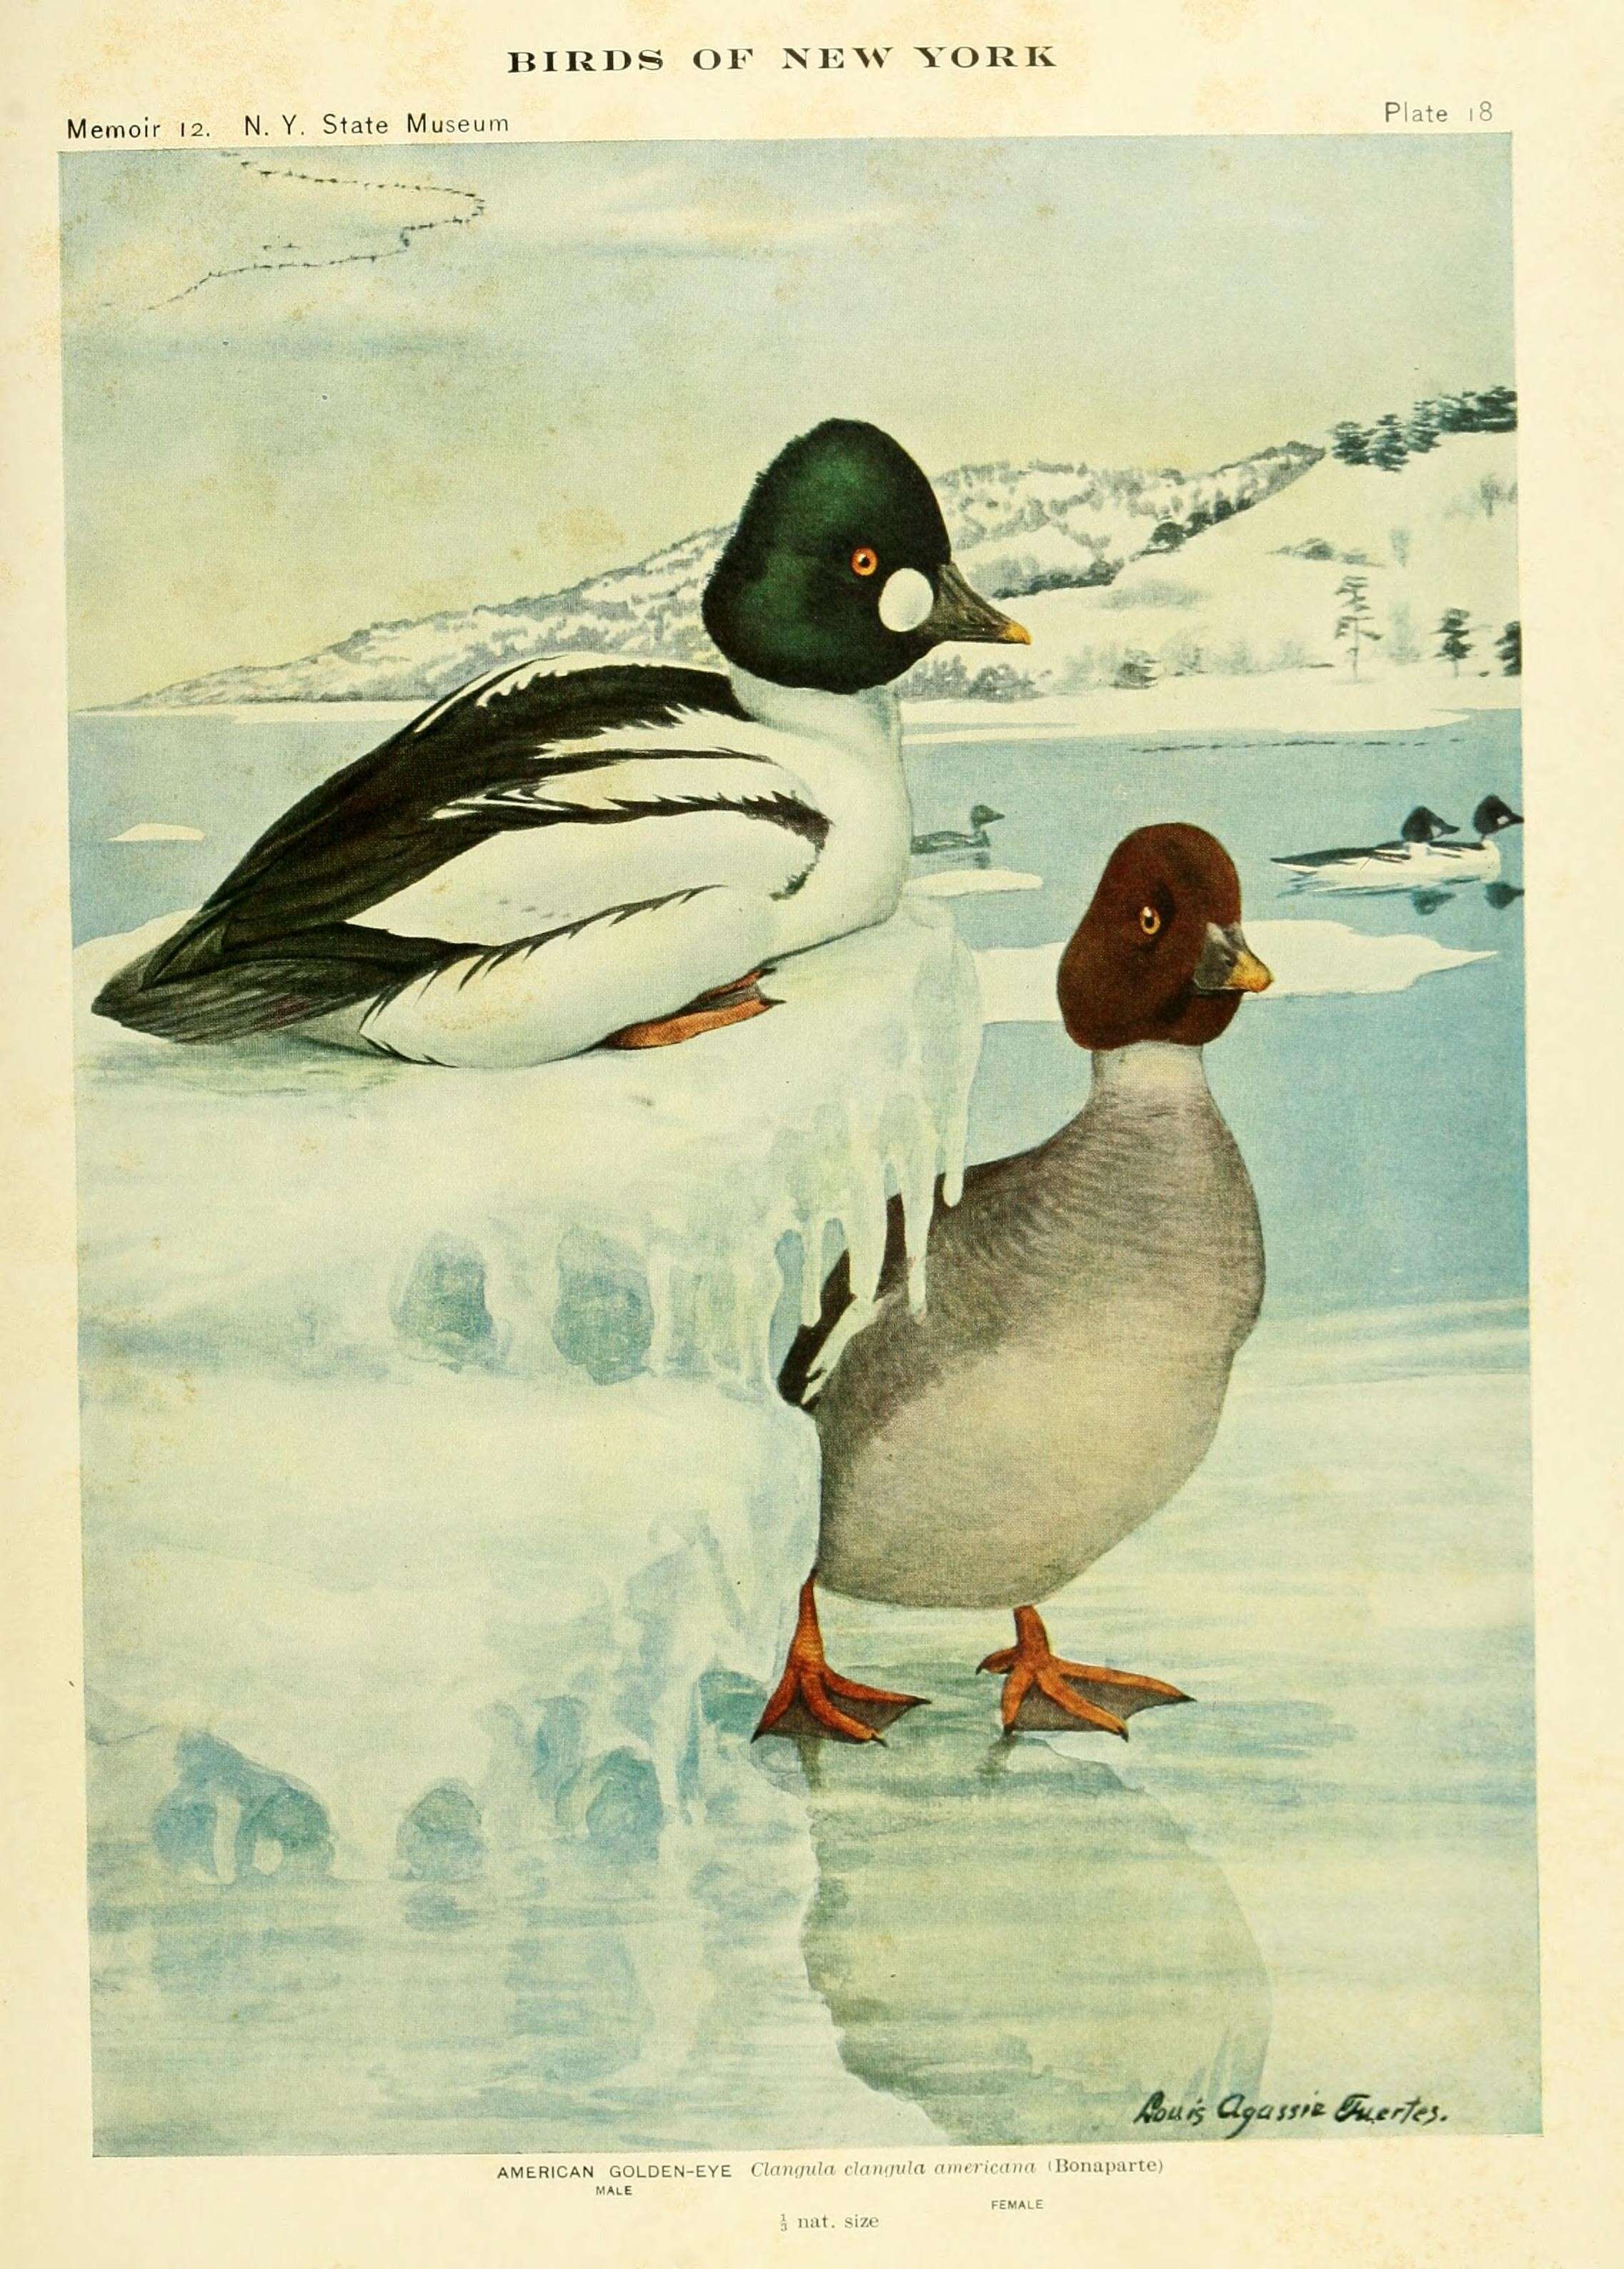 Image of waterfowl